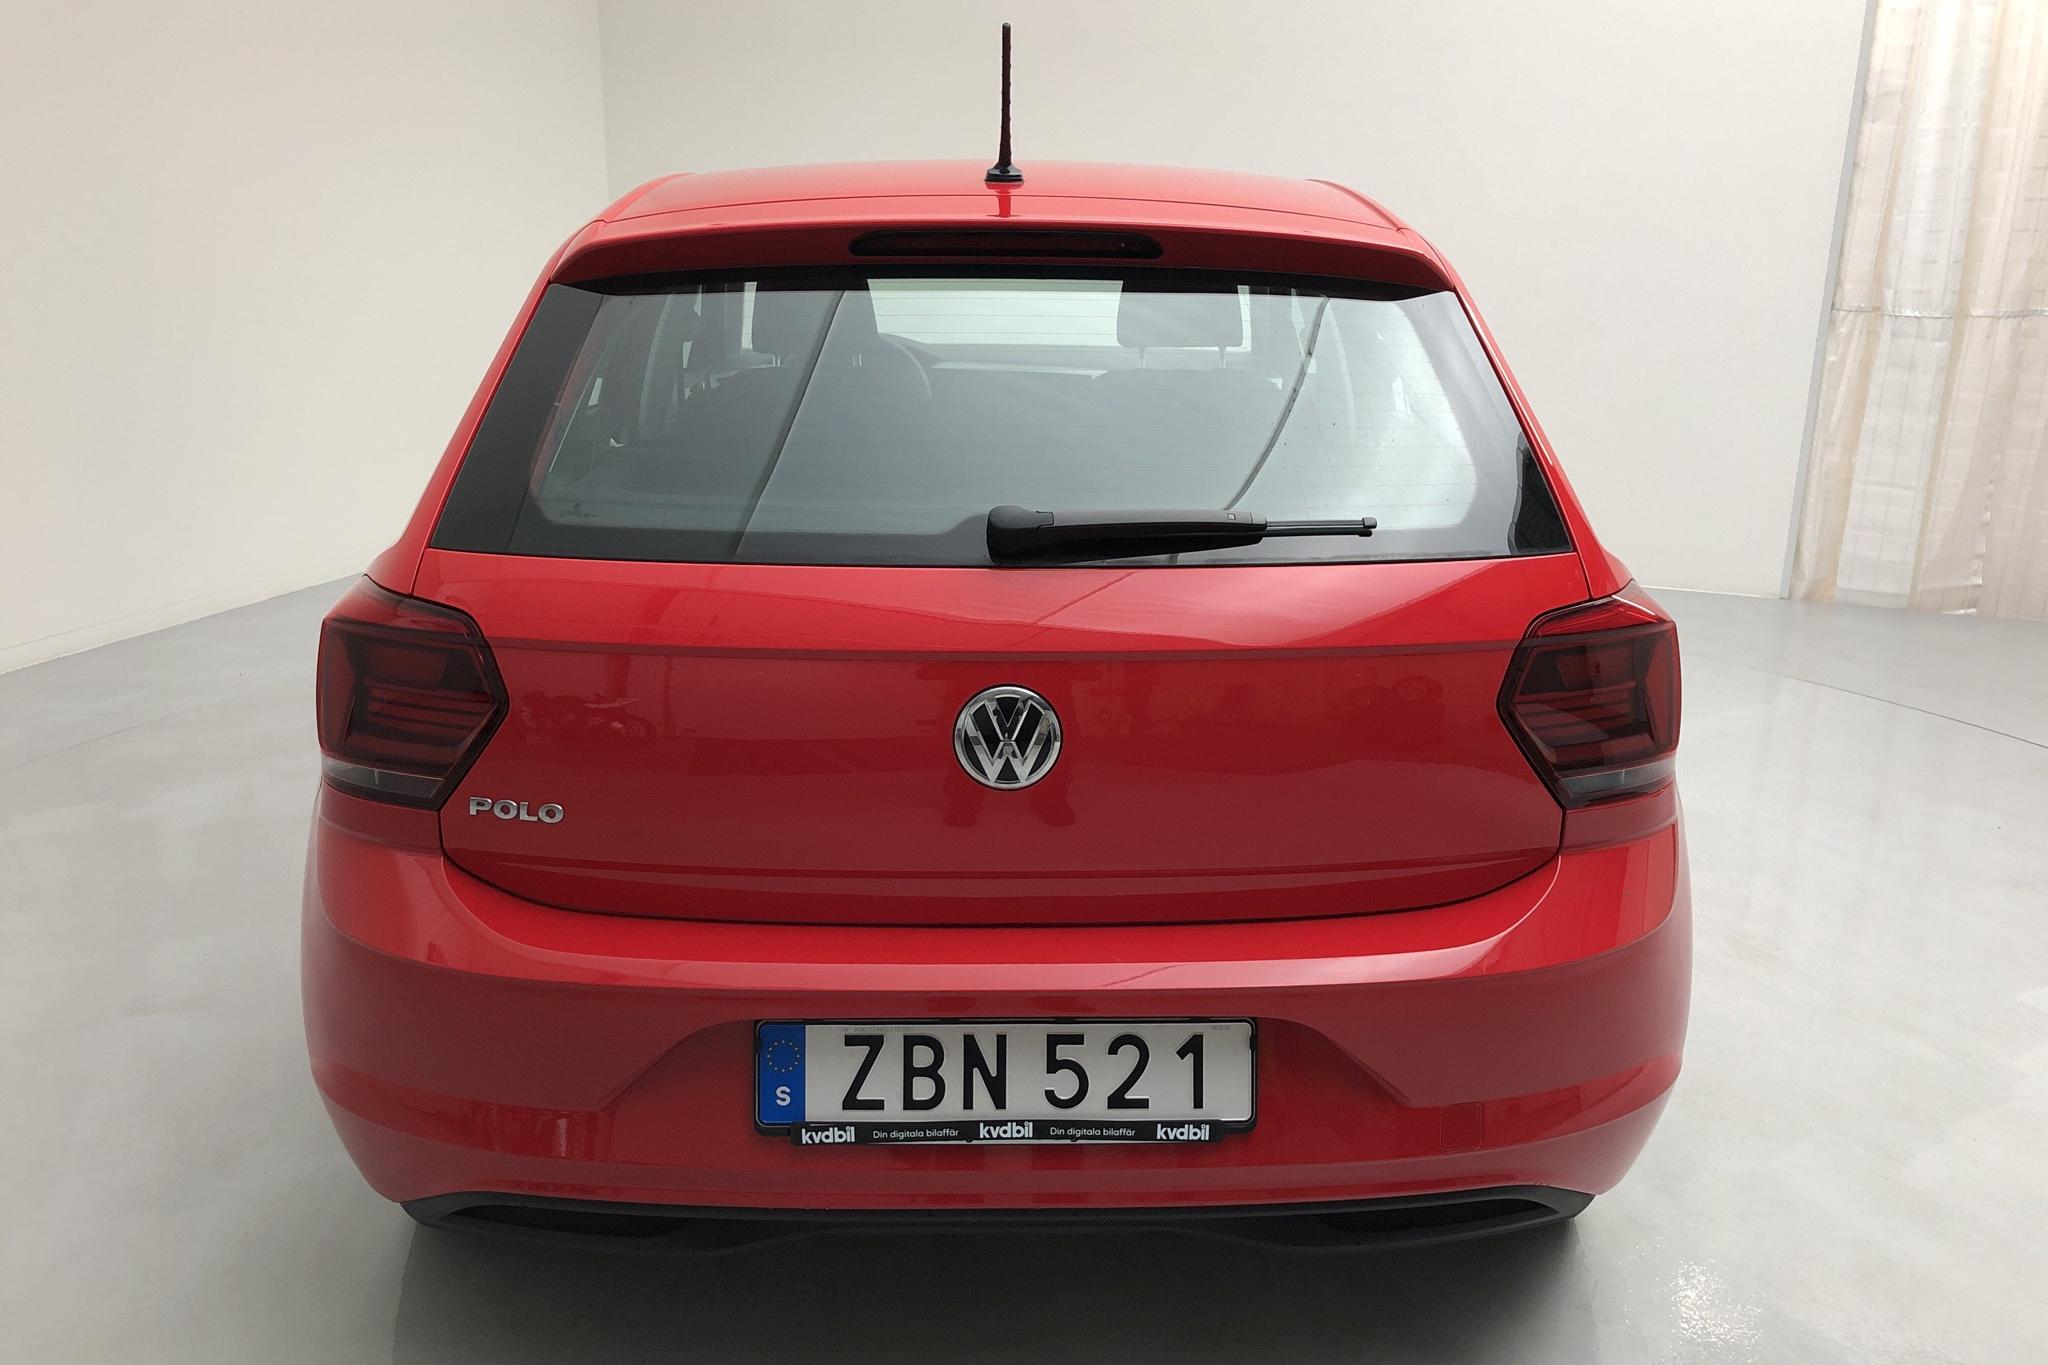 VW Polo 1.0 TSI 5dr (95hk) - 23 080 km - Automatic - red - 2018